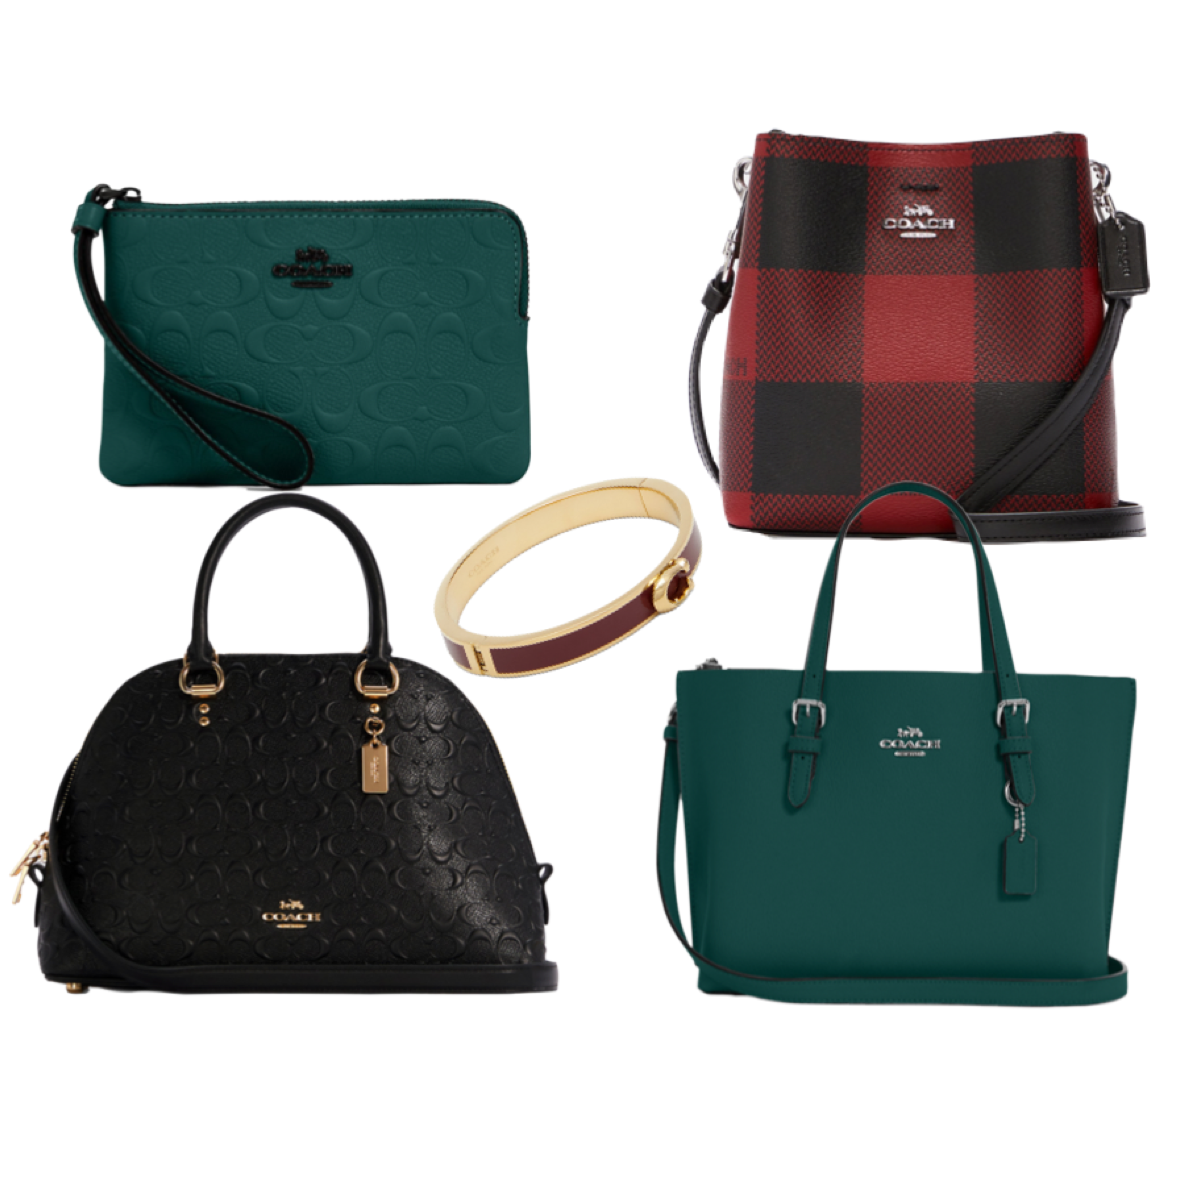 Coach Outlet Black Friday sale is still going! Save up to 80%